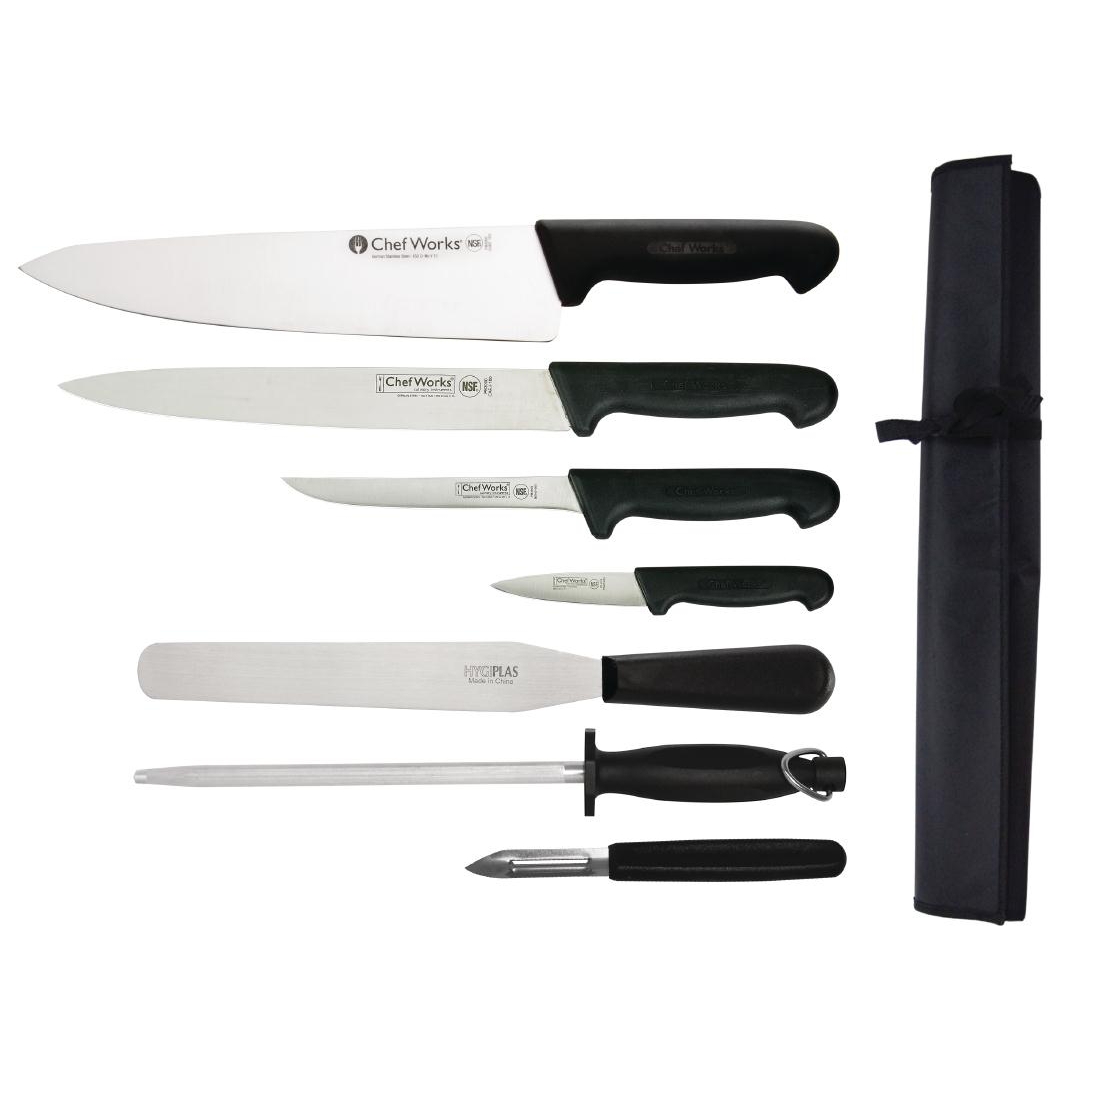 Chef Works 7 Piece Knife Set and Wallet